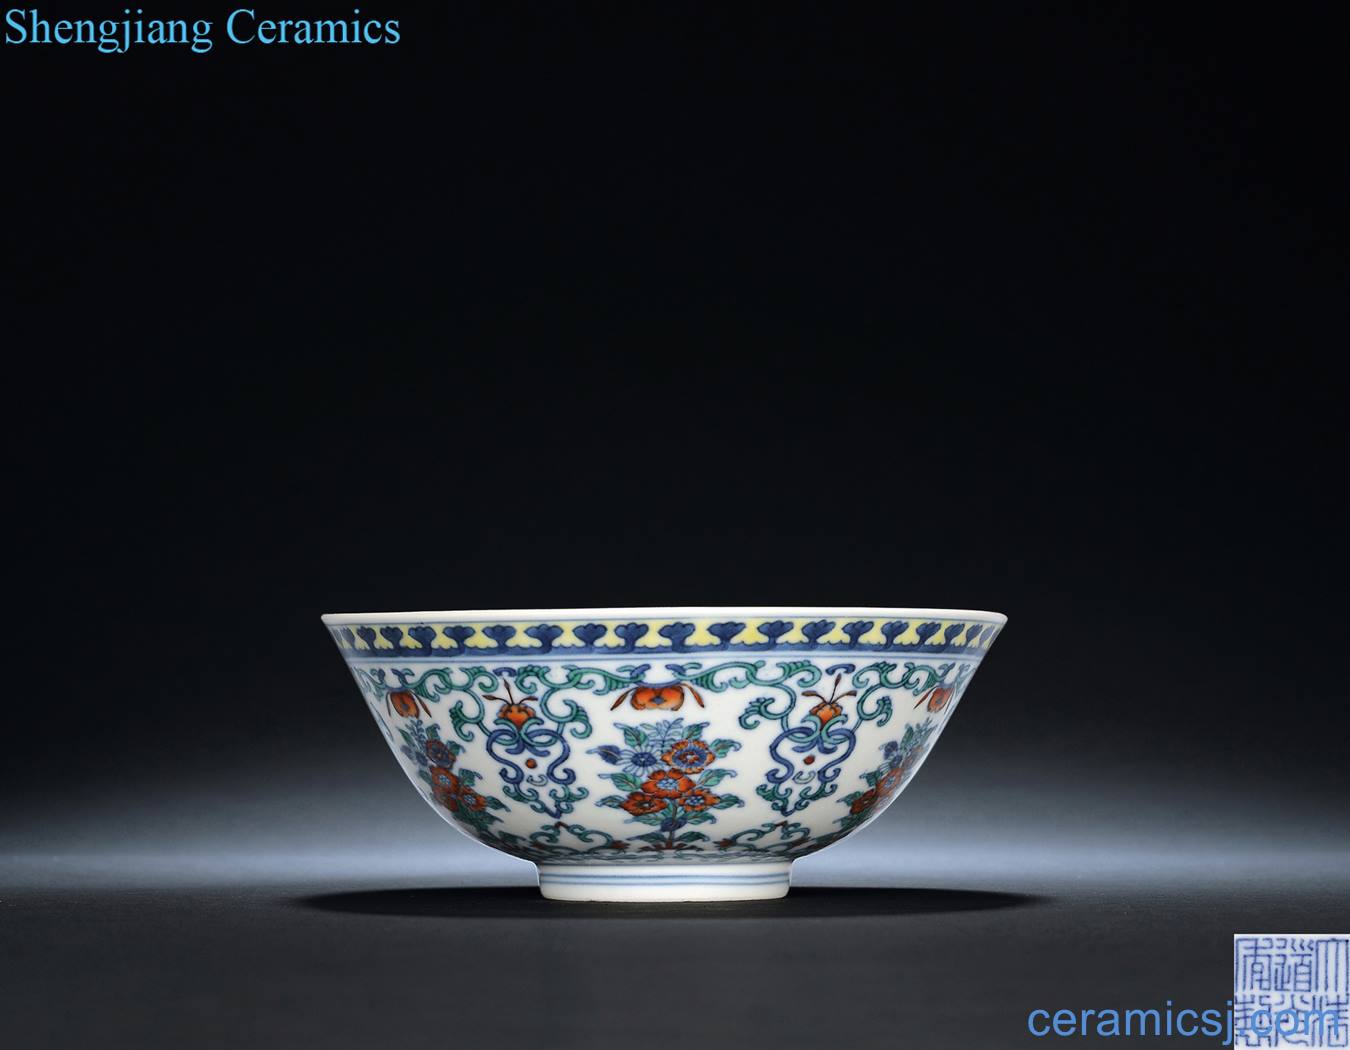 Qing daoguang bucket color flower bowls